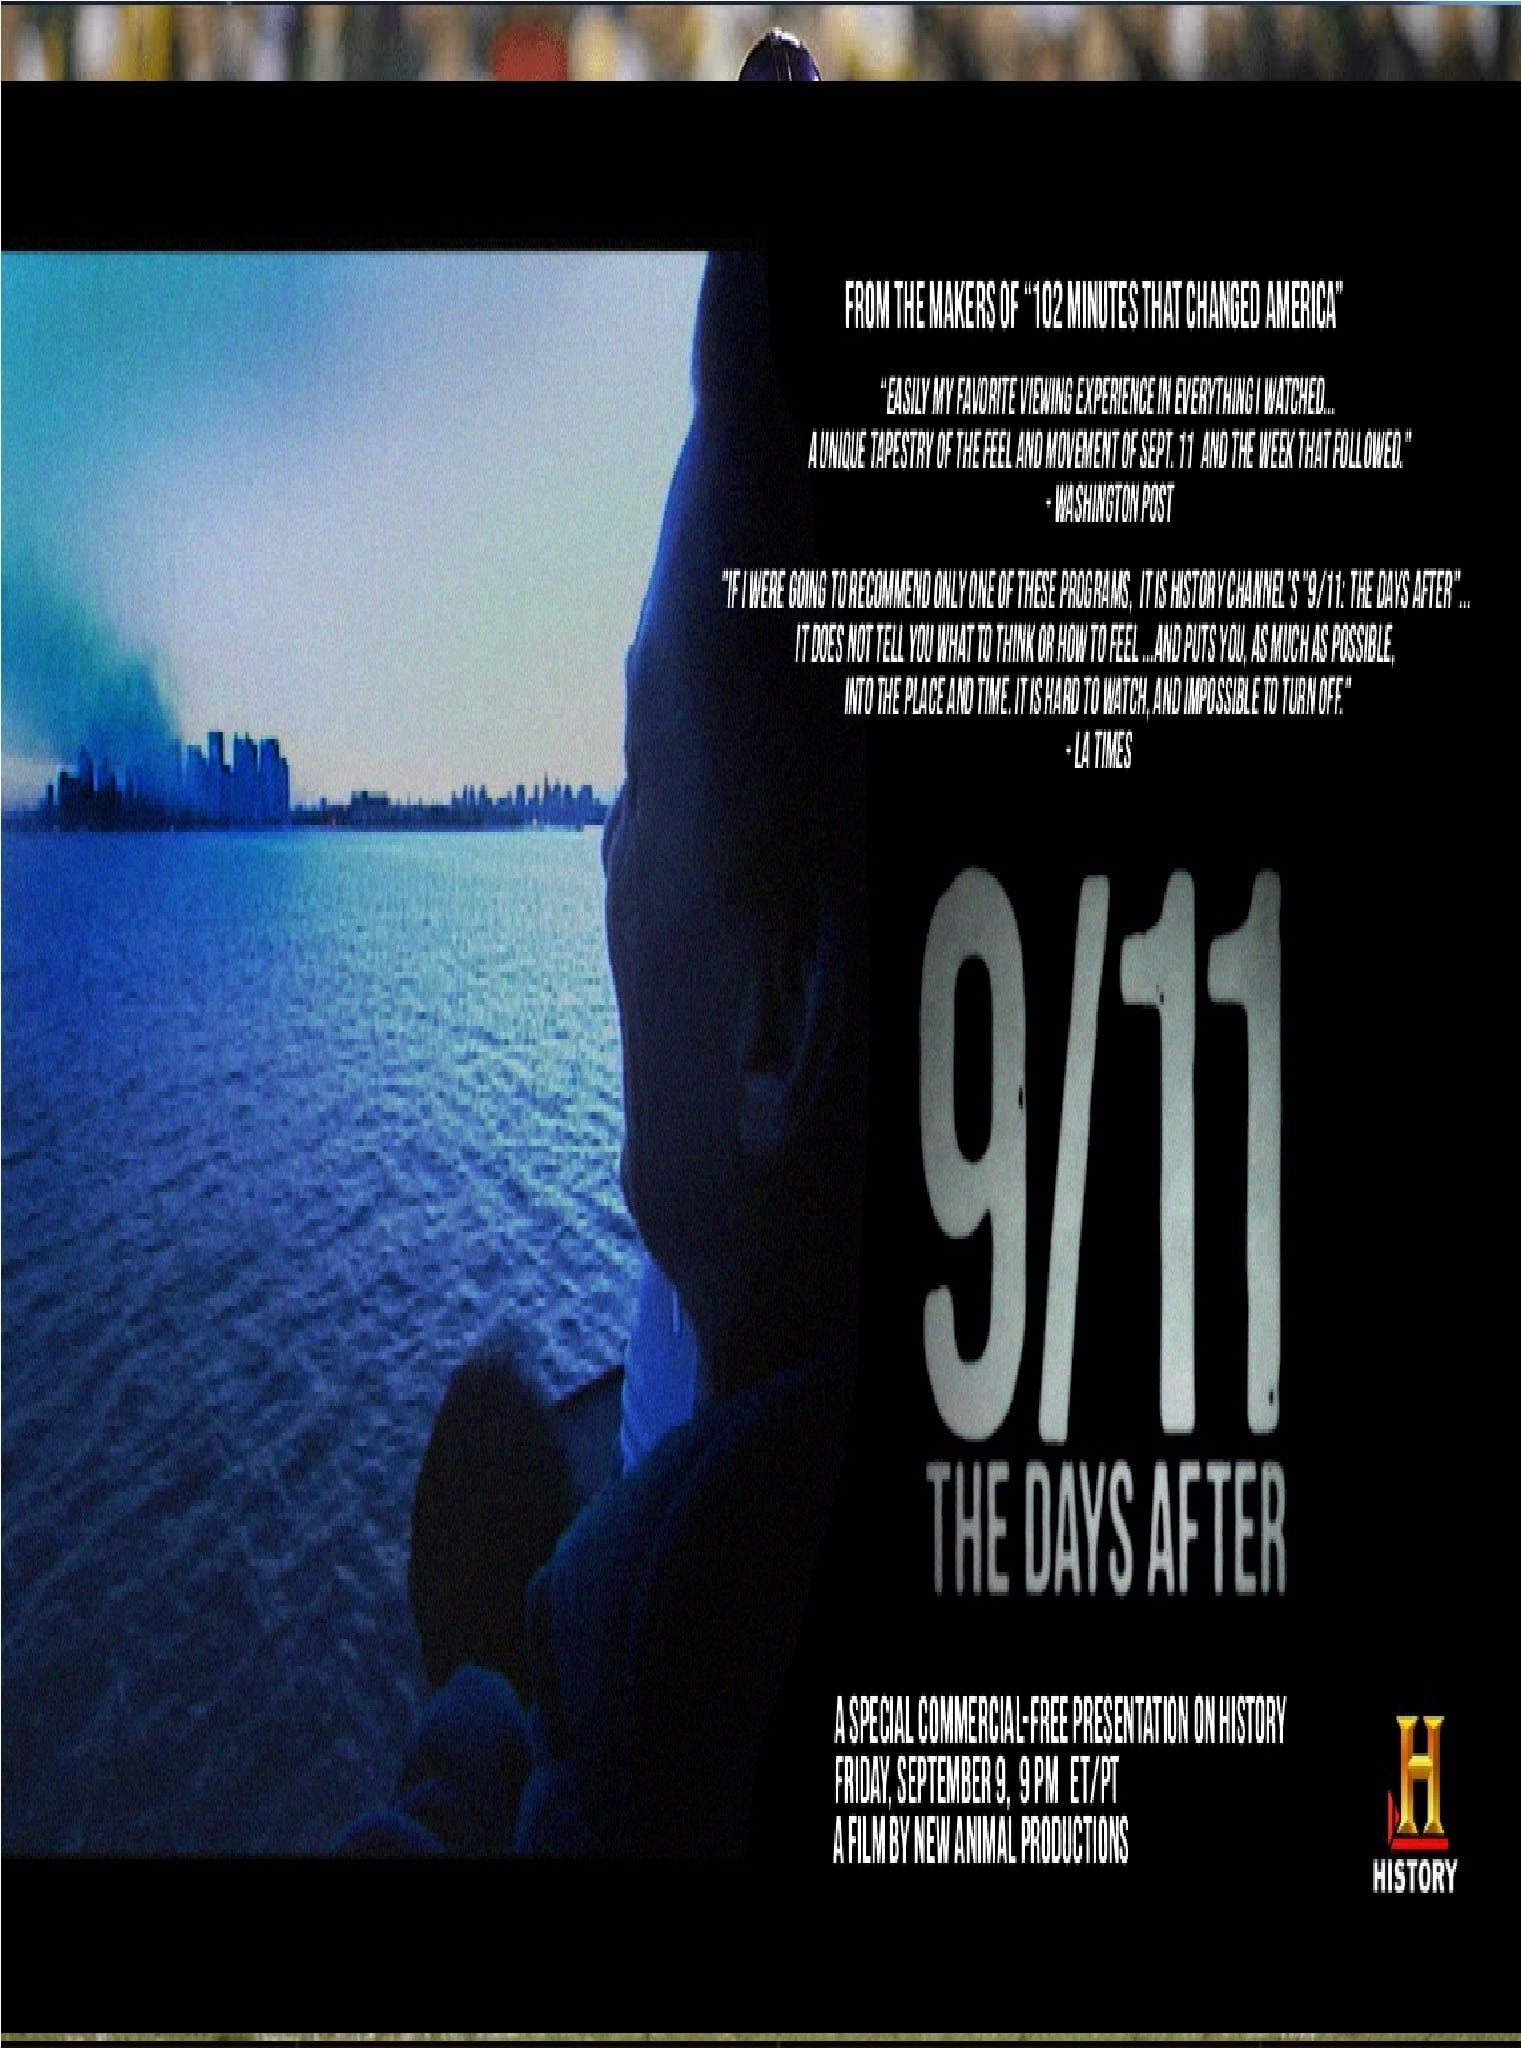 9/11: The Days After